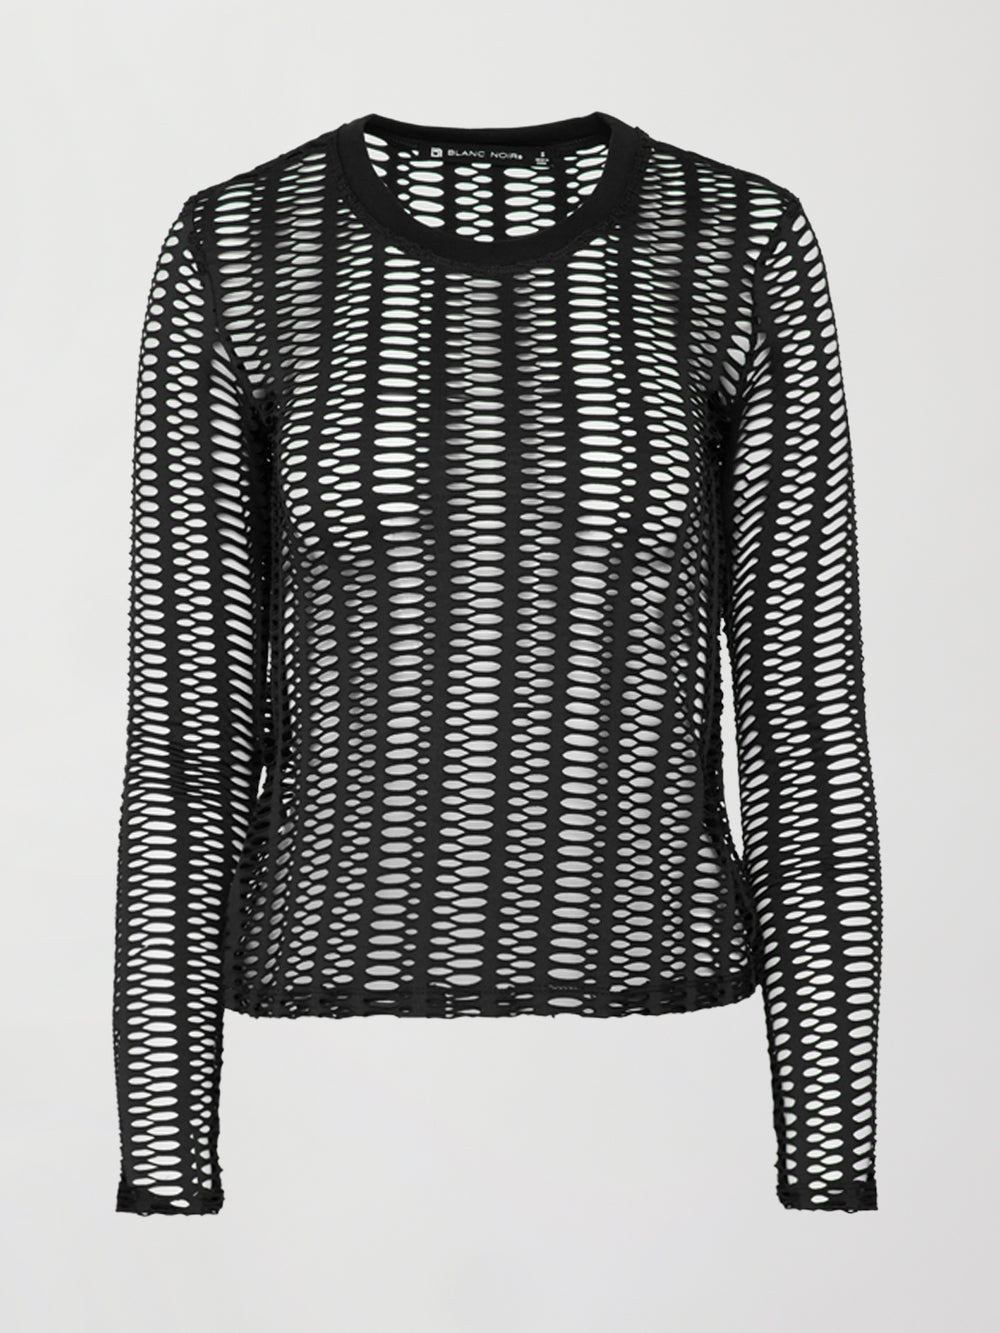 L/S Linear Mesh Fitted Top - BLACK